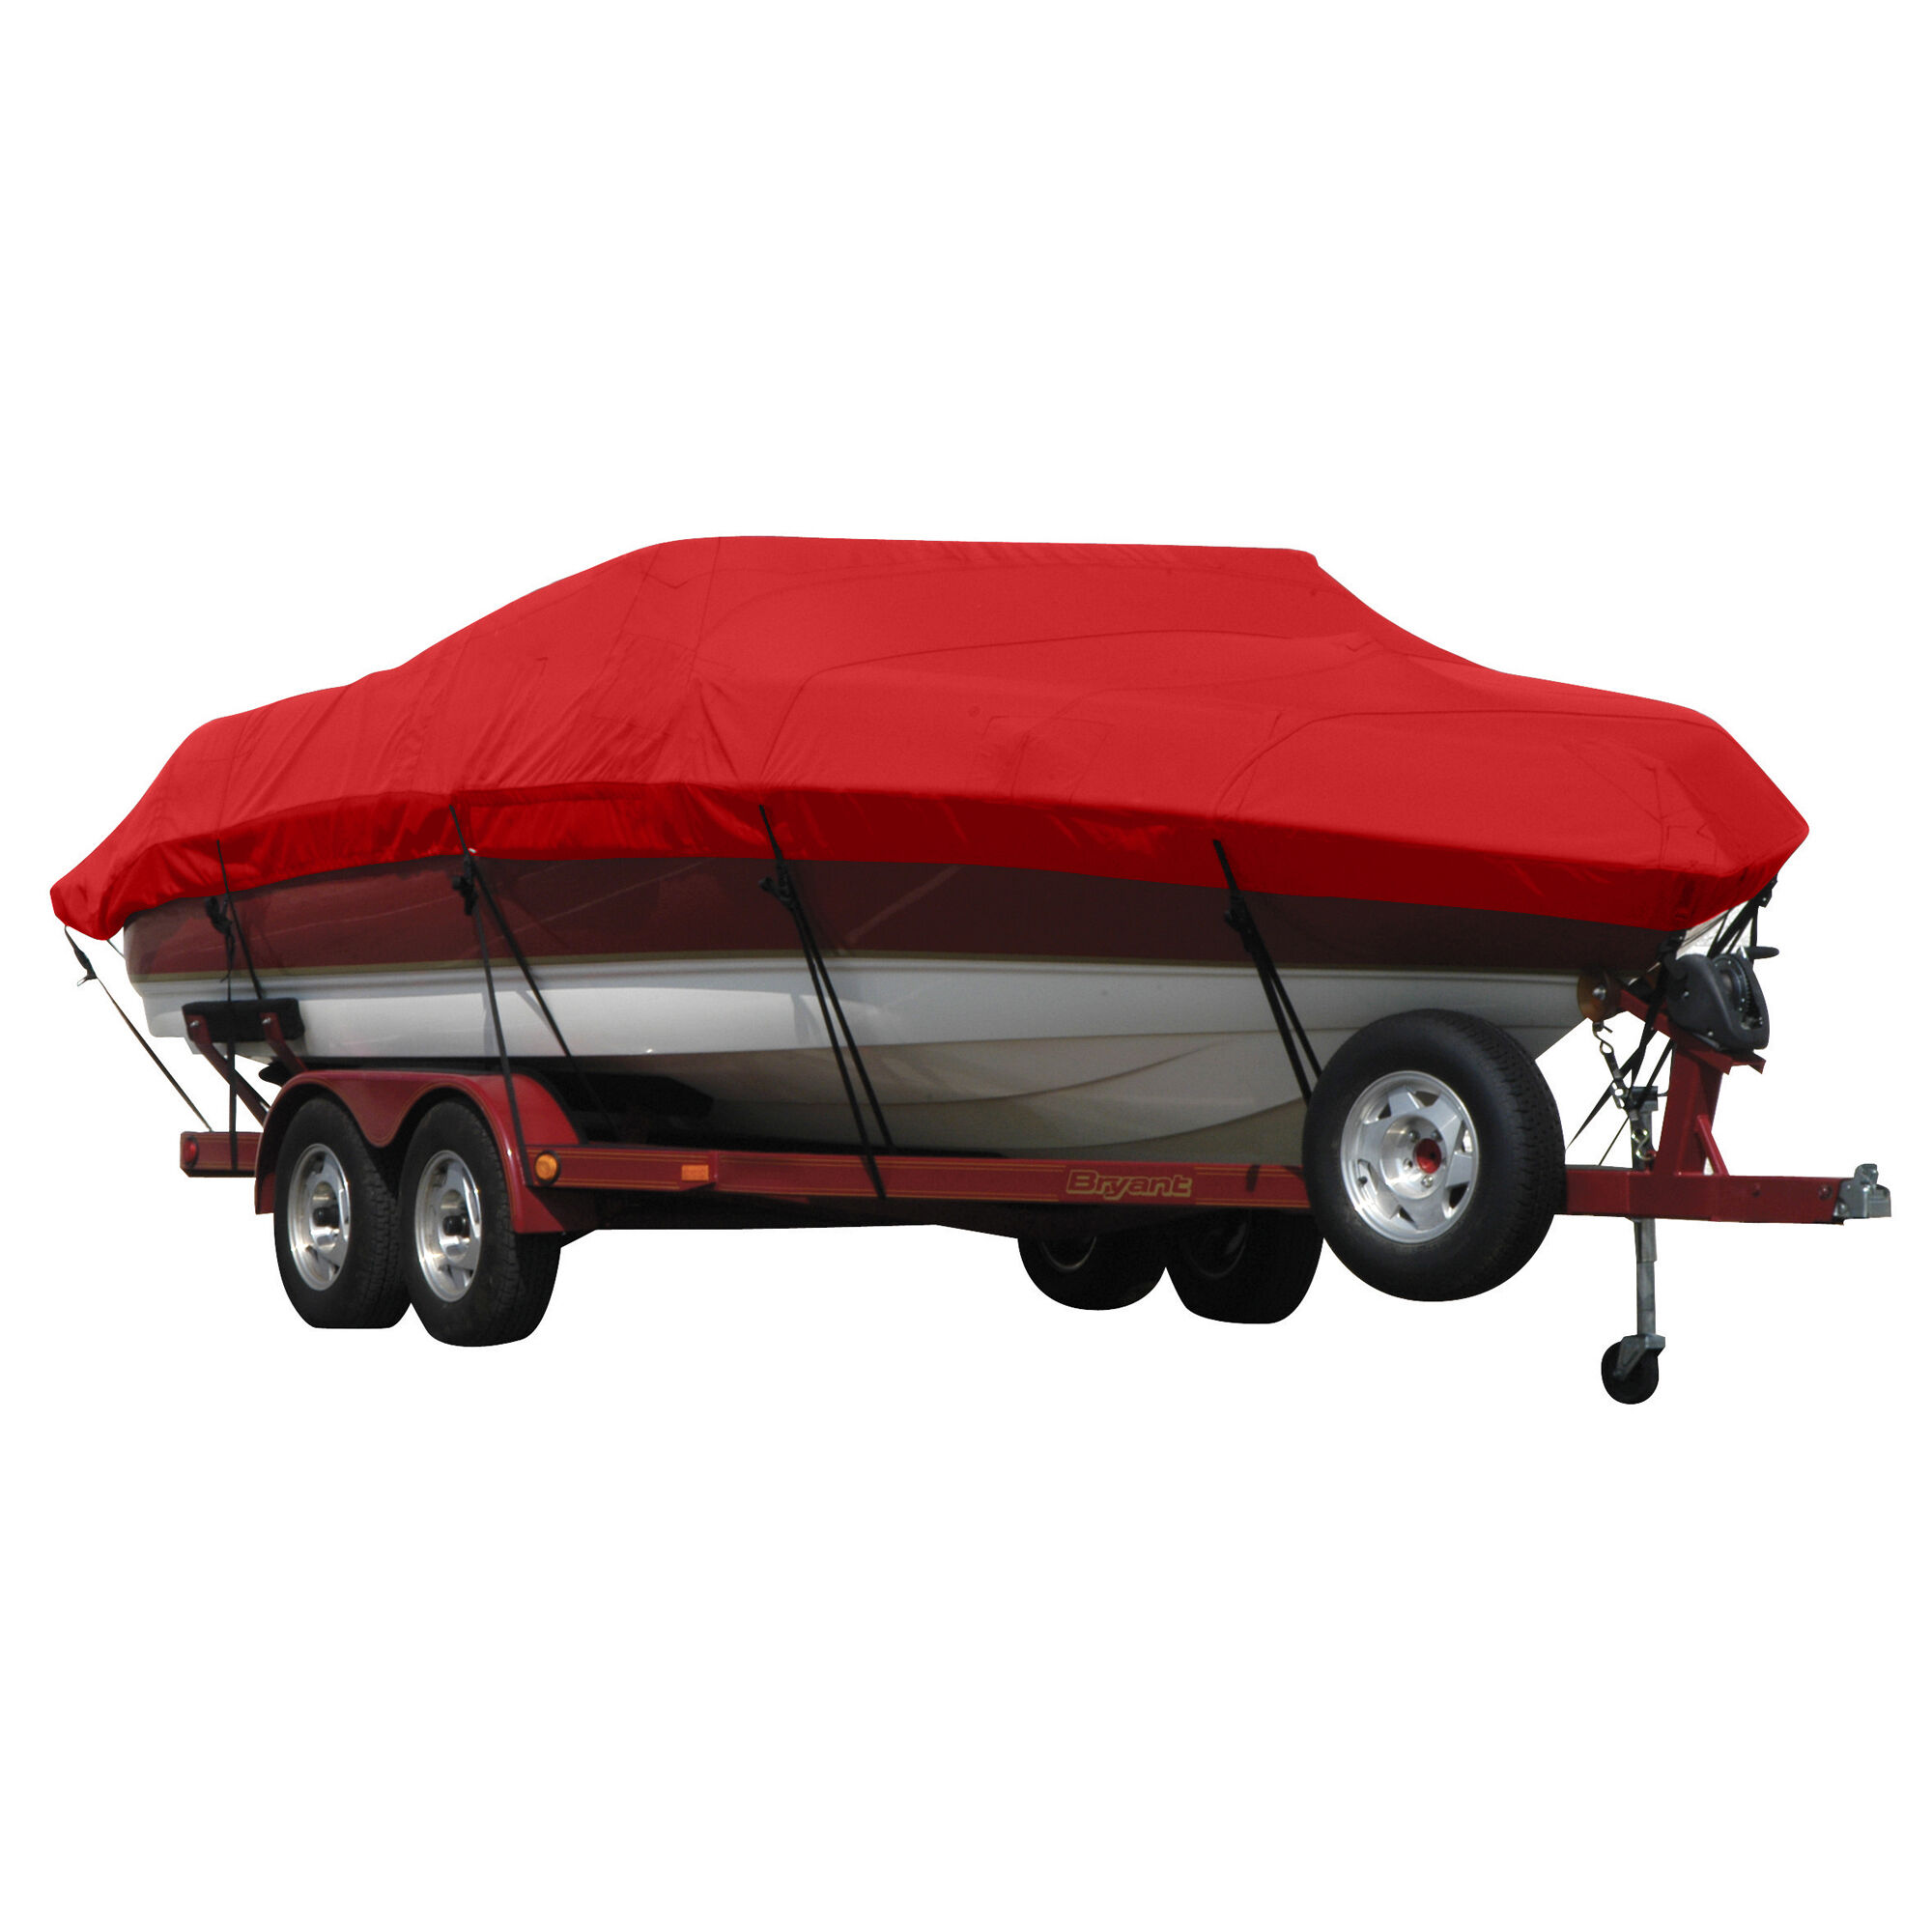 Covermate Exact Fit Sunbrella Boat Cover for Campion Chase 910 Zri Chase 910 Zri Cc I/O. Jockey Red